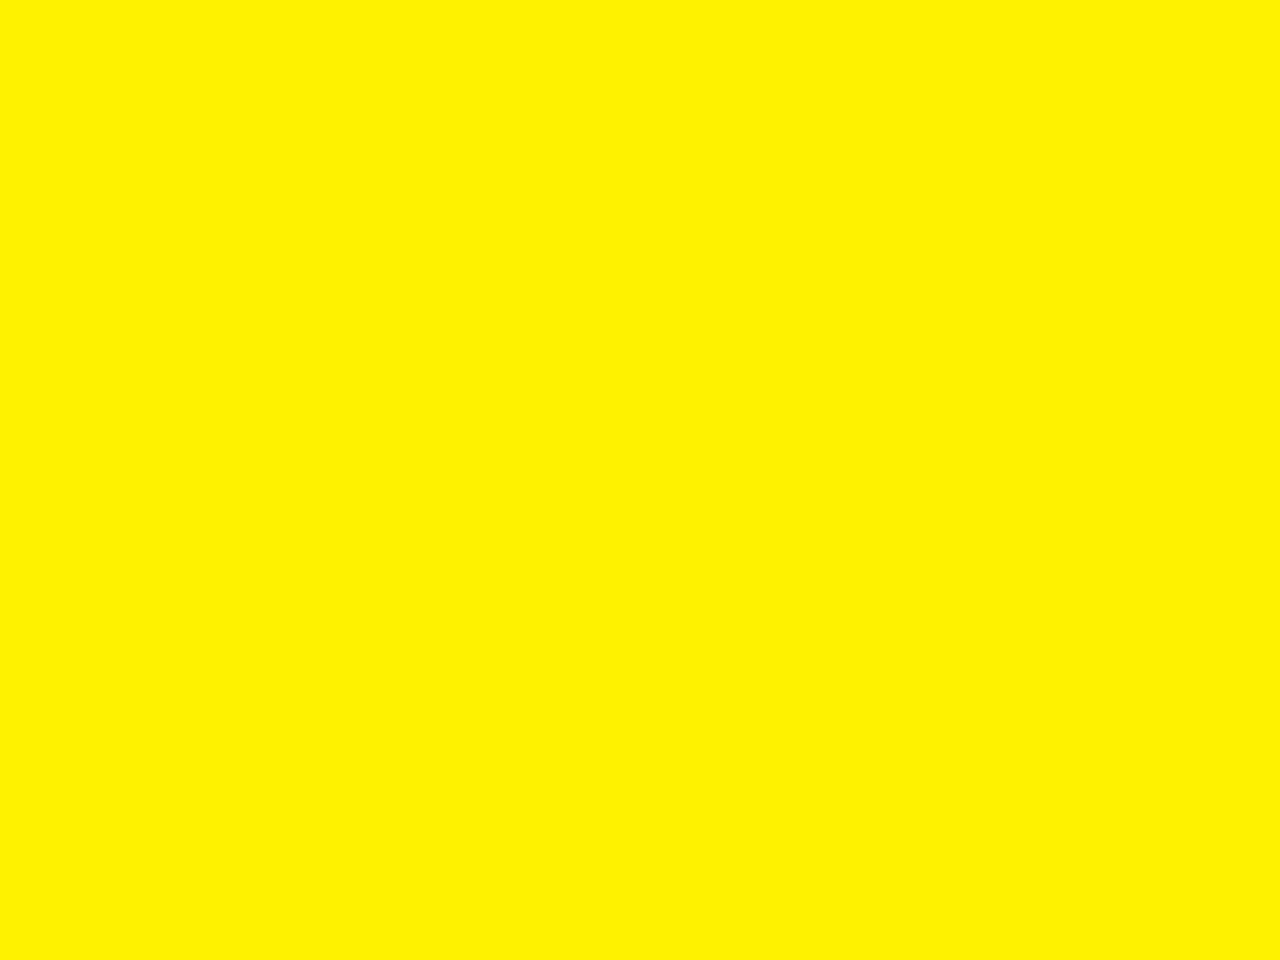 1280x960-yellow-rose-solid-color-background.jpg